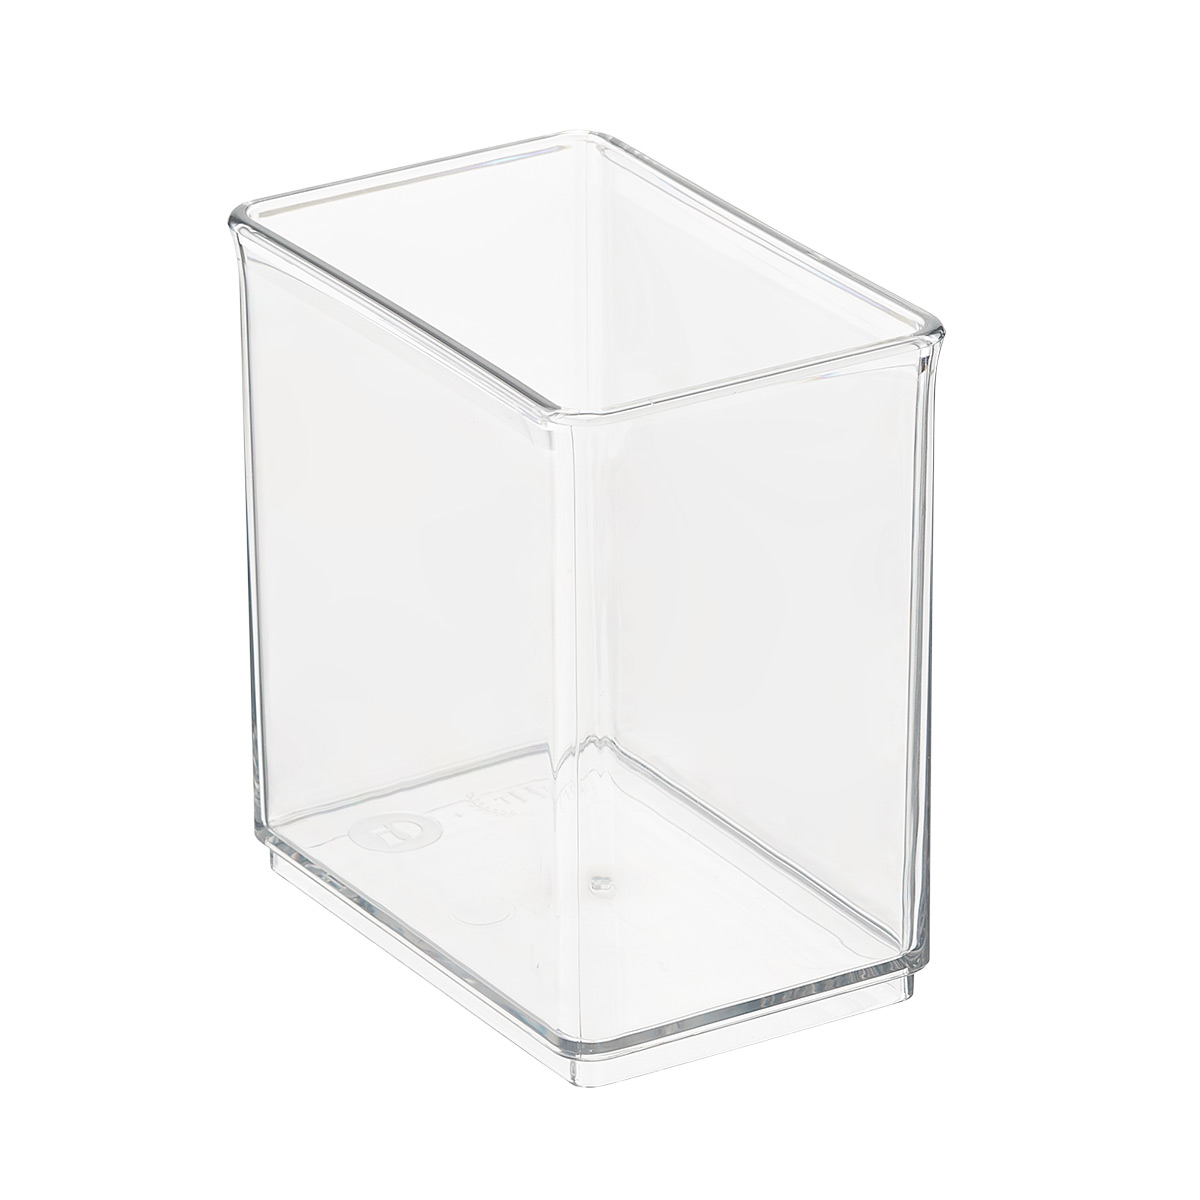 https://images.containerstore.com/catalogimages?sku=10077092